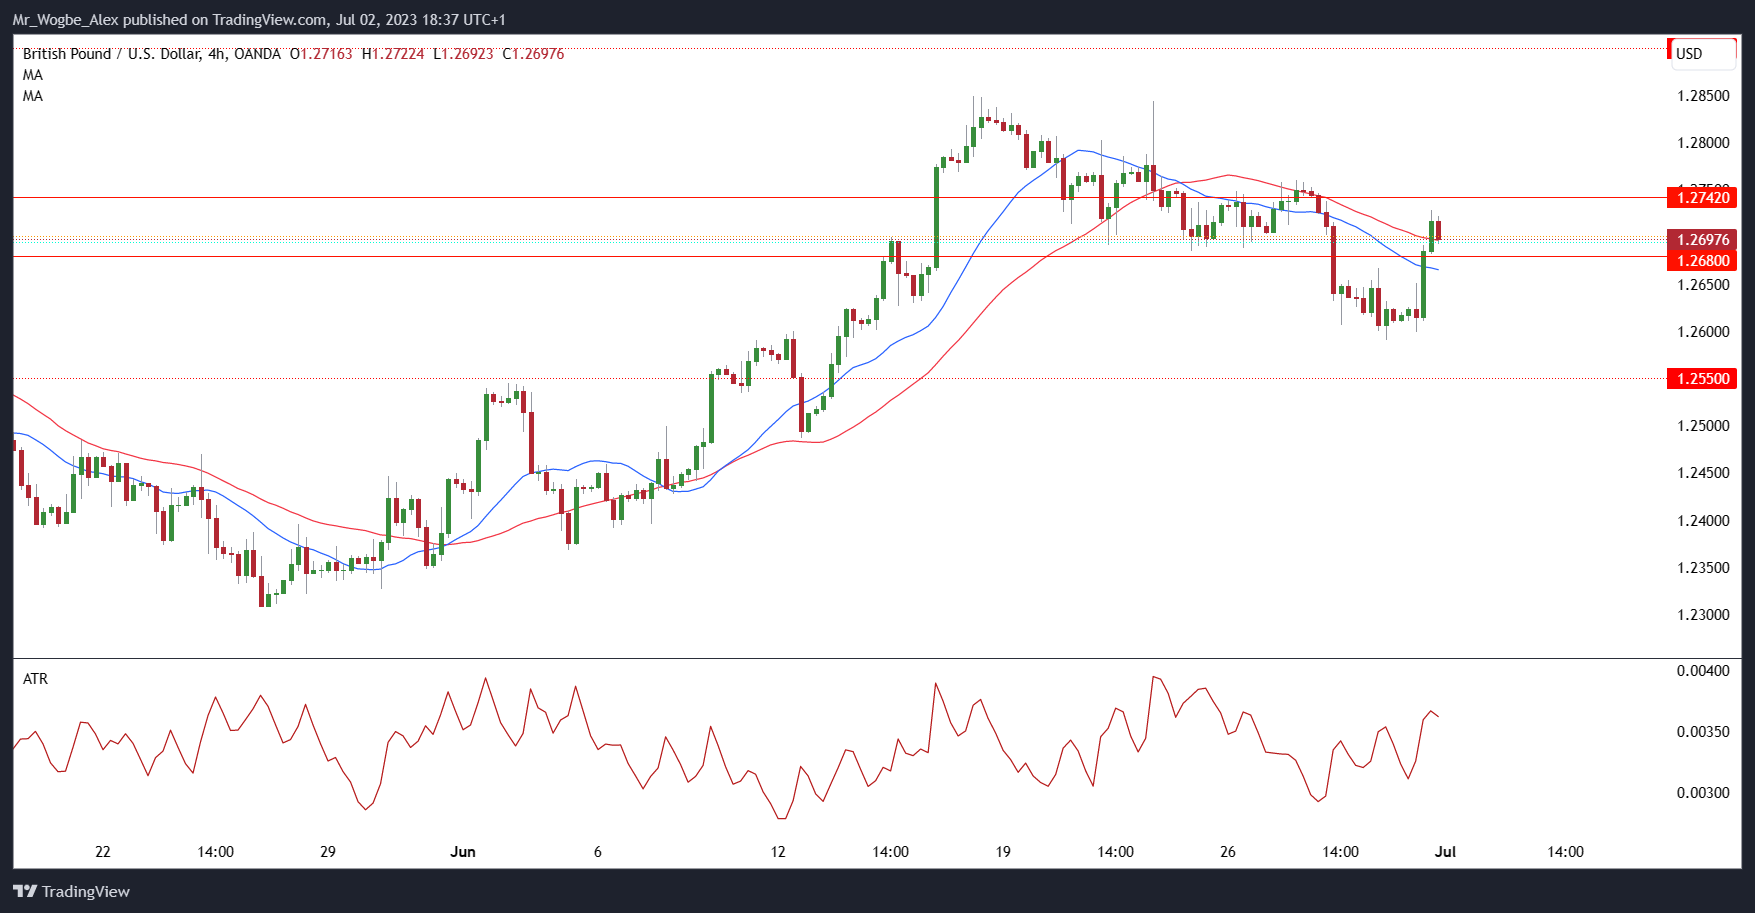 GBP/USD 4-hour chart from TradingView